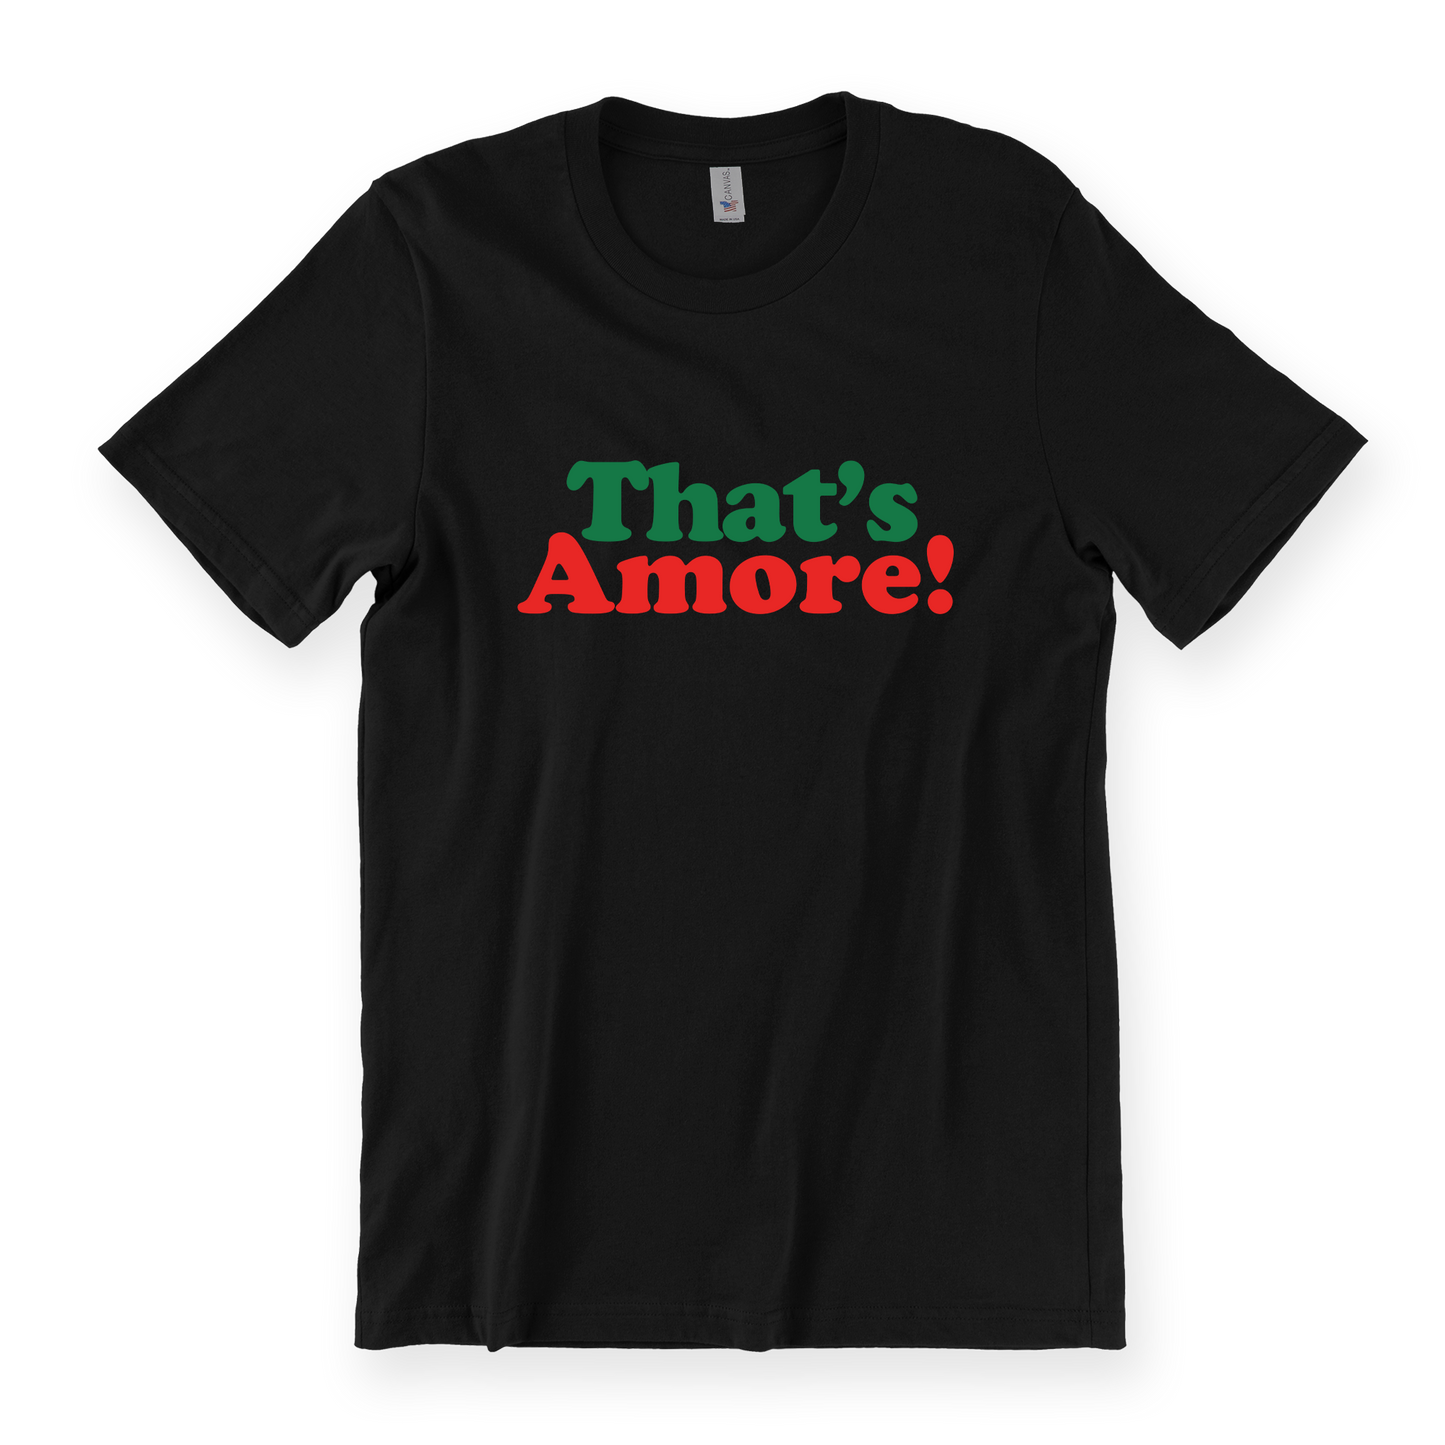 That's Amore! Tee - Black